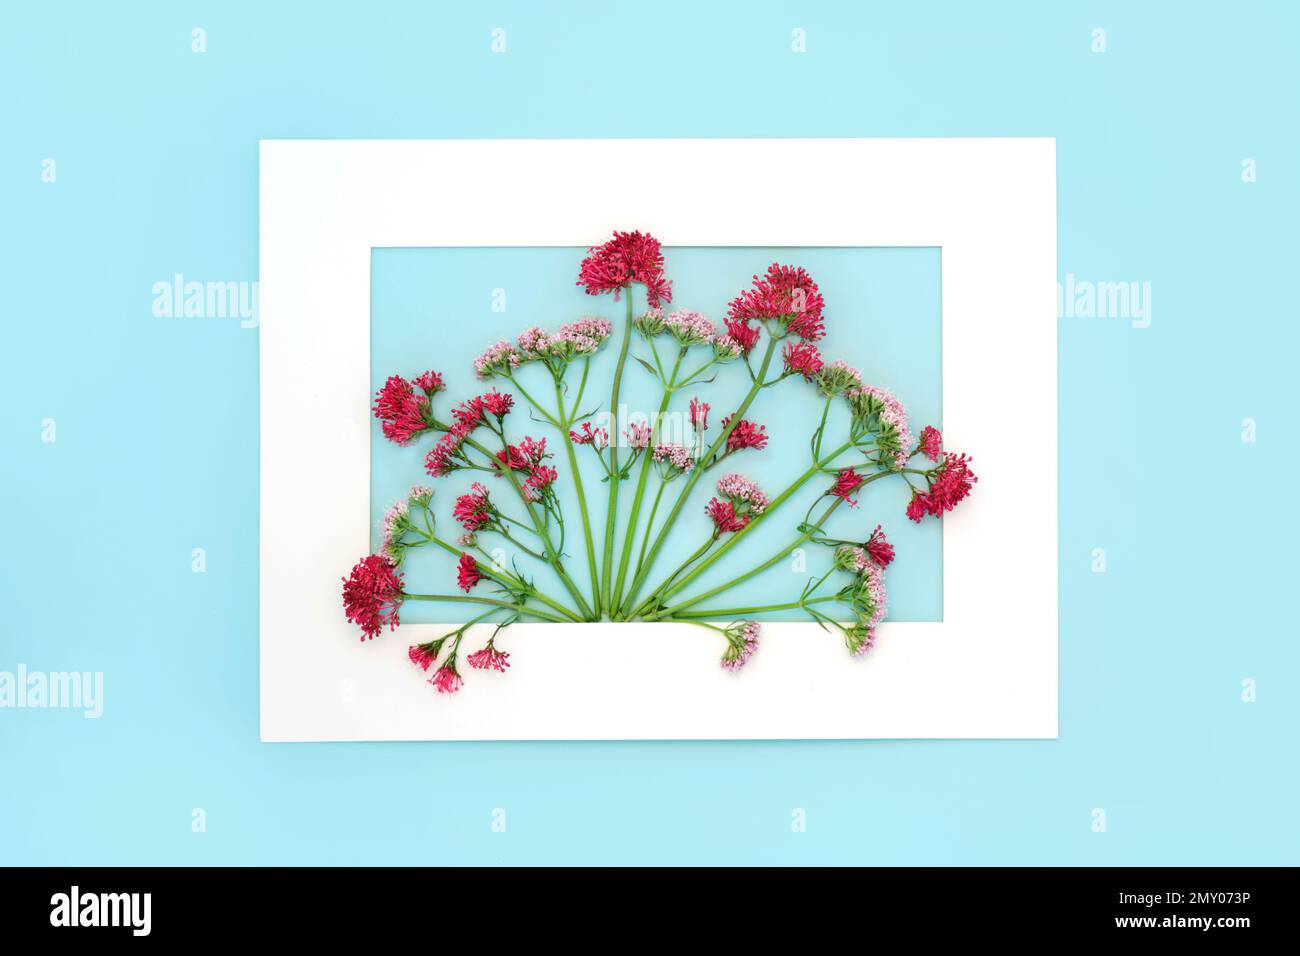 Valerian herb flower plant background border. Flowers can be used to make perfume. Minimal floral border botanical nature study composition. On blue. Stock Photo